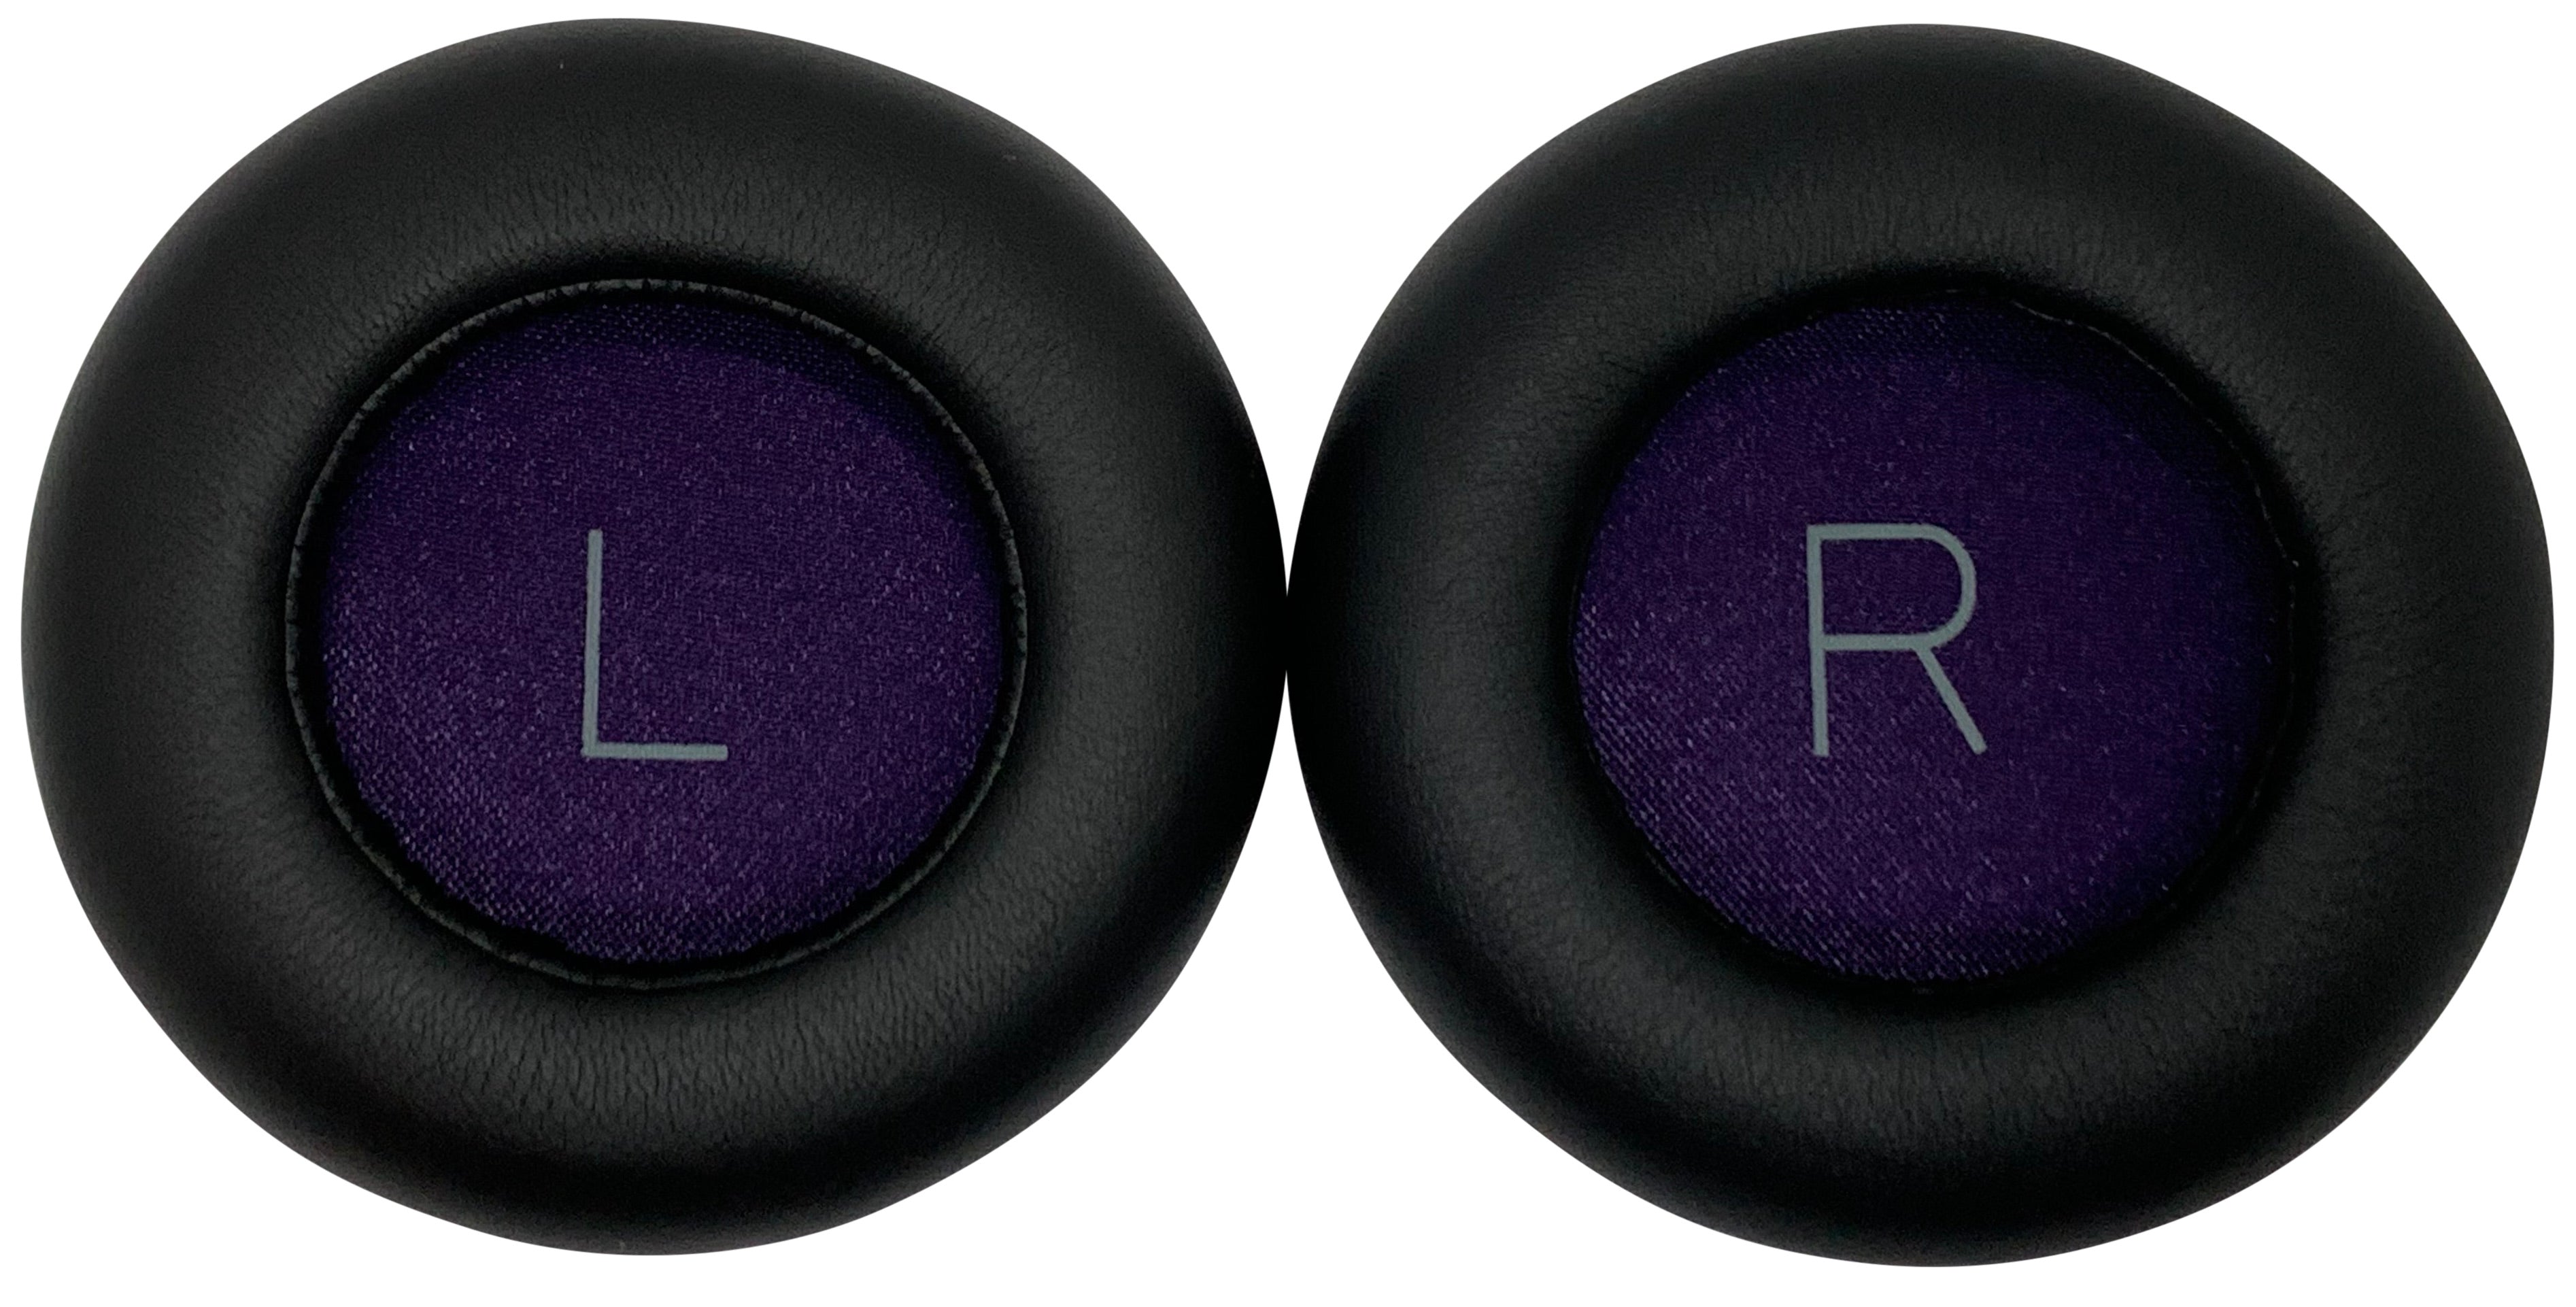 Replacement Ear Pad Cushions for Plantronics Backbeat Pro Wireless Headphones - CentralSound